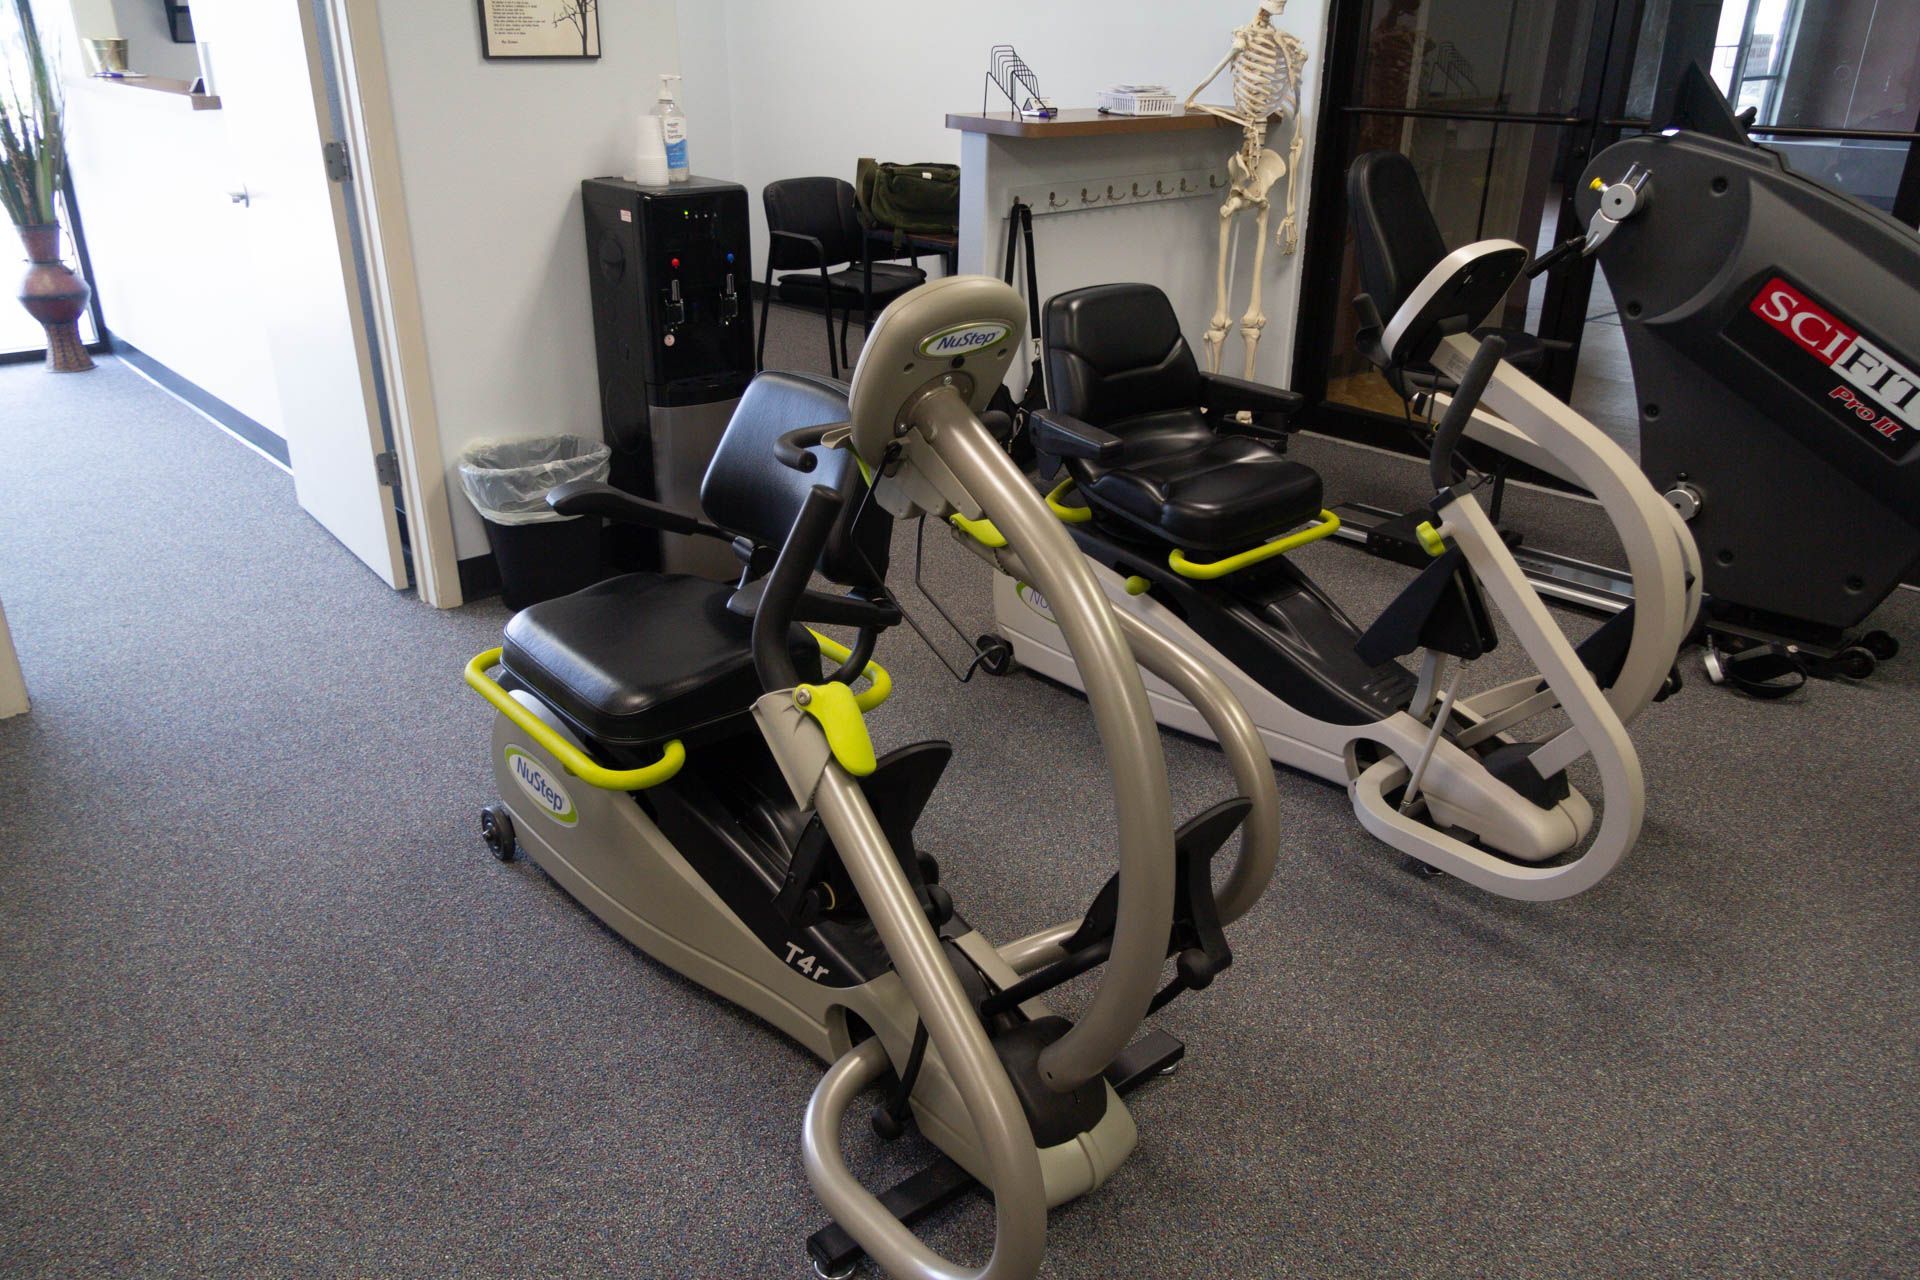 Two exercise bikes are sitting in a room next to each other.